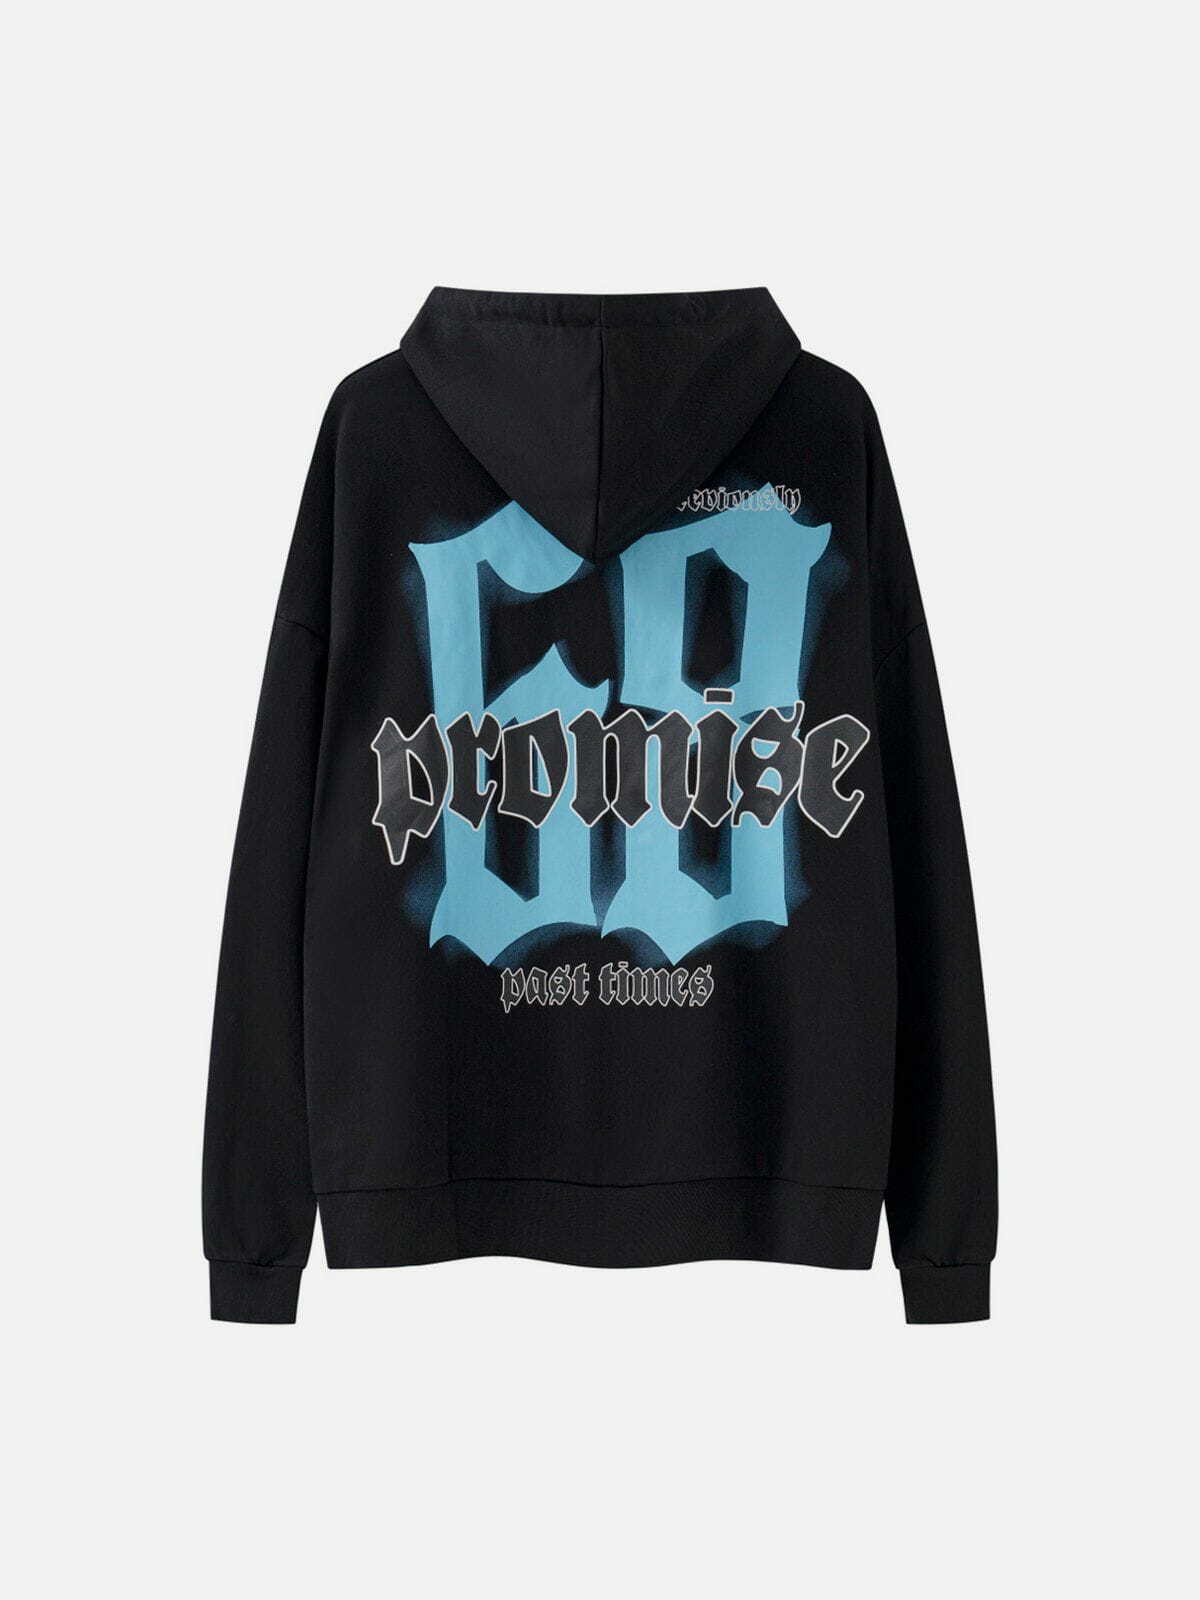 gothic letter number hoodie edgy & youthful streetwear 8052